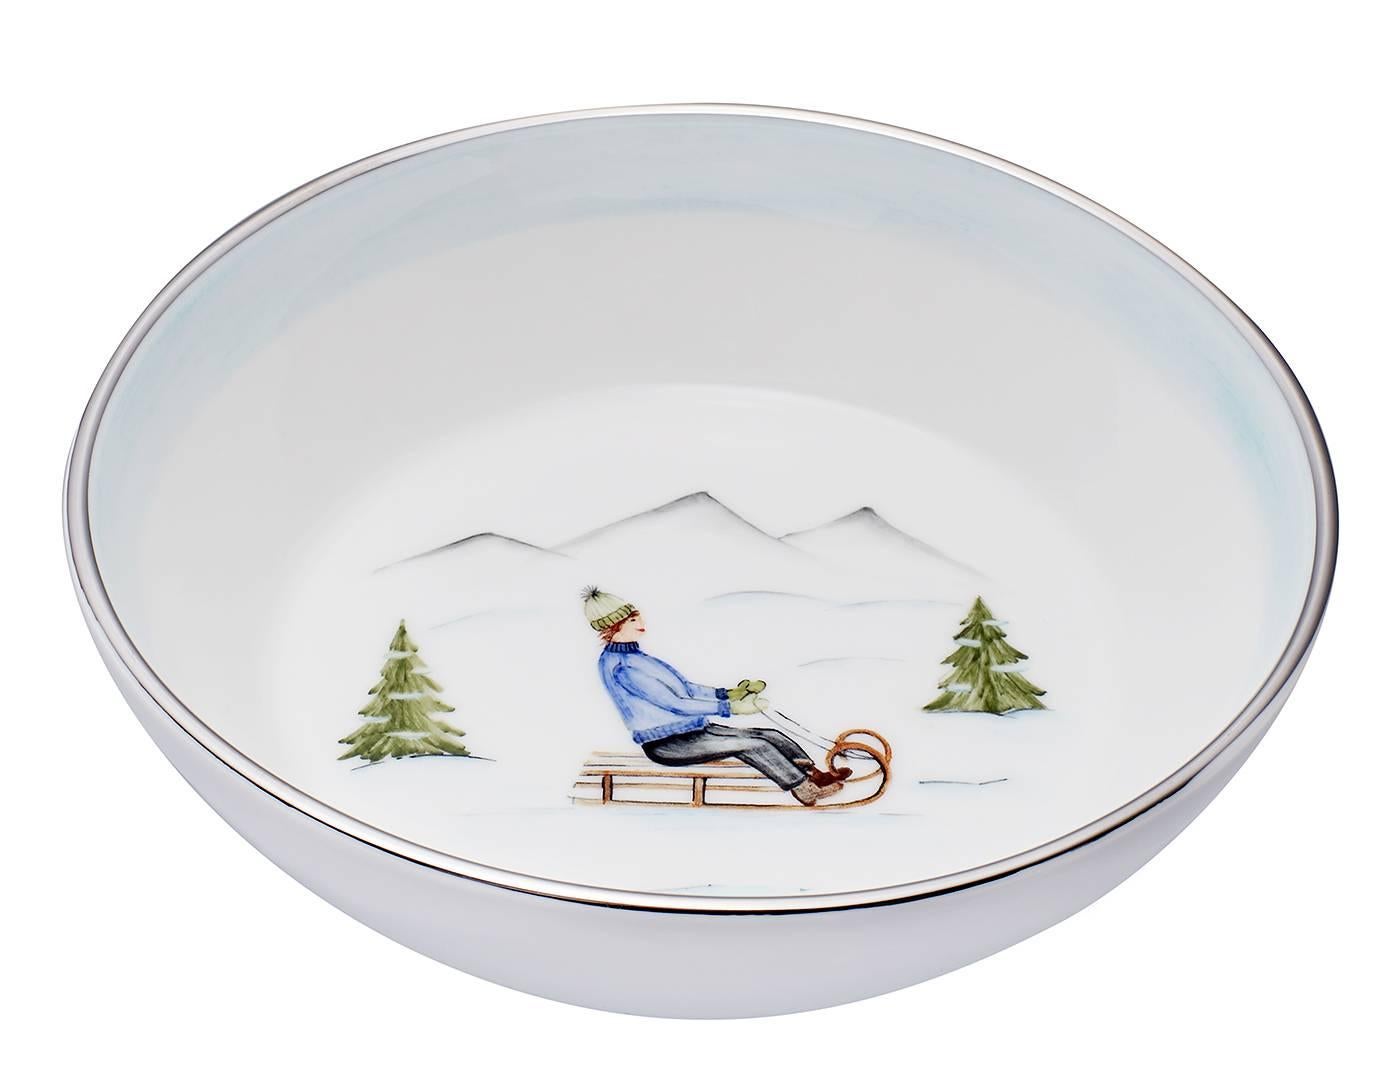 These completely handmade porcelain bowls painted with a charming hands-free winter decor come as a set of two designs. One shows a boy on a sladder and the other bowl is hands-free painted with a pair of ice skater. Rimmed with a 24 carat gold or